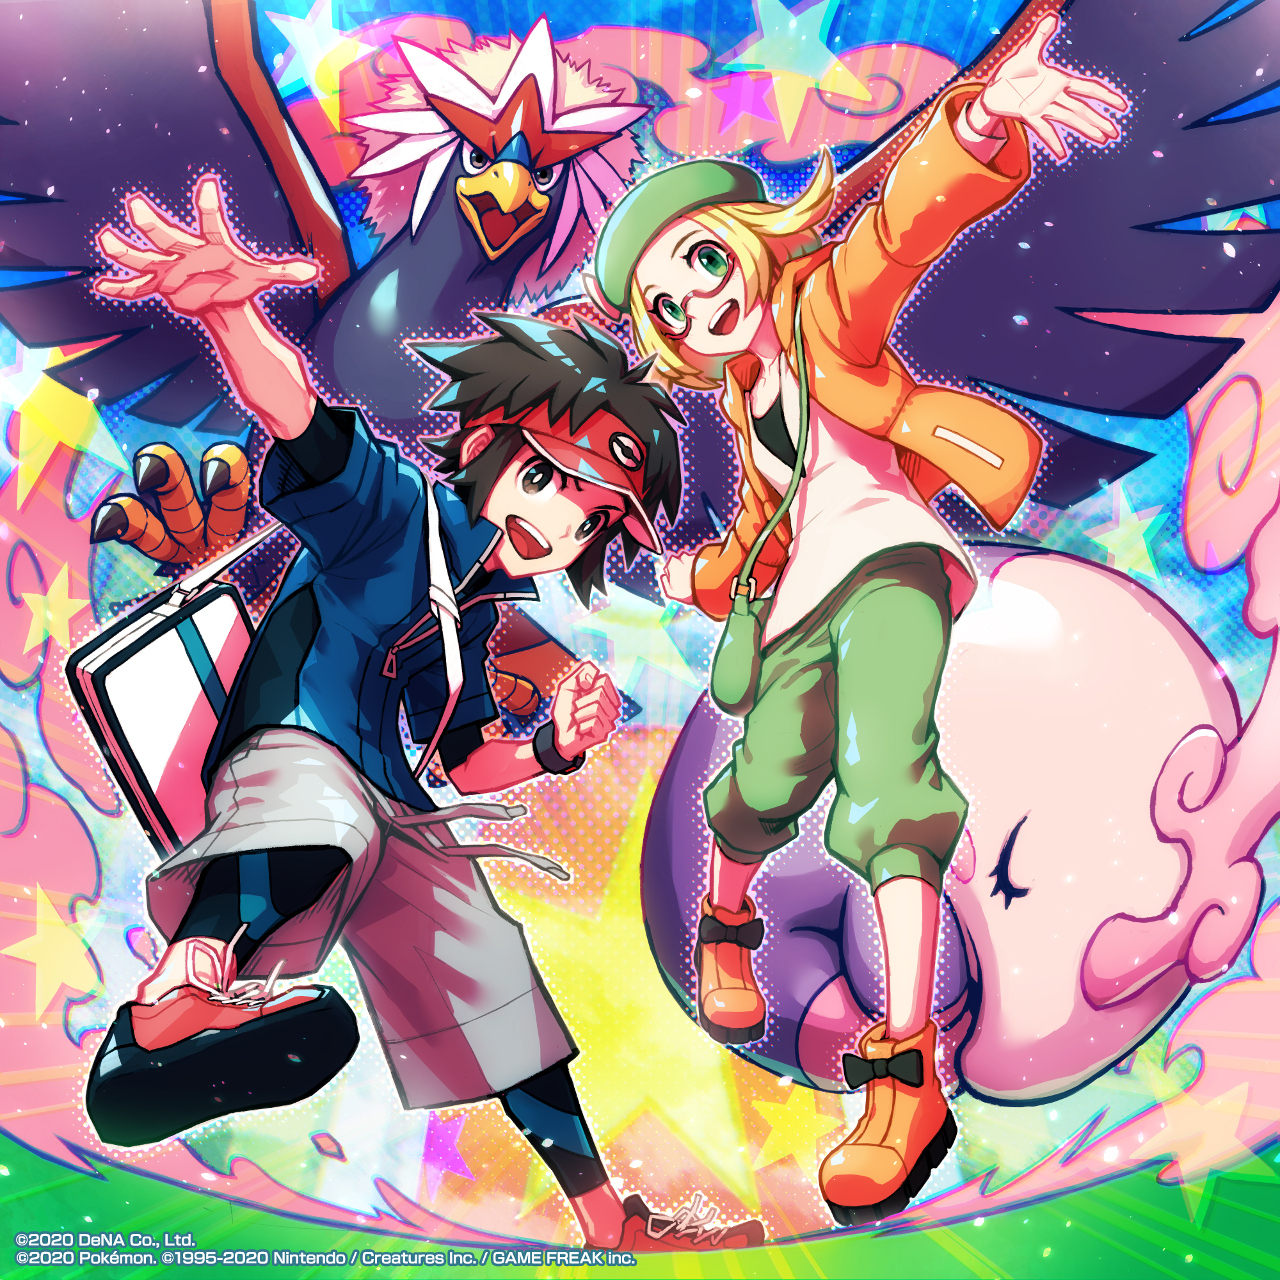 Race to Victory Key Art, featuring Nate and Bianca